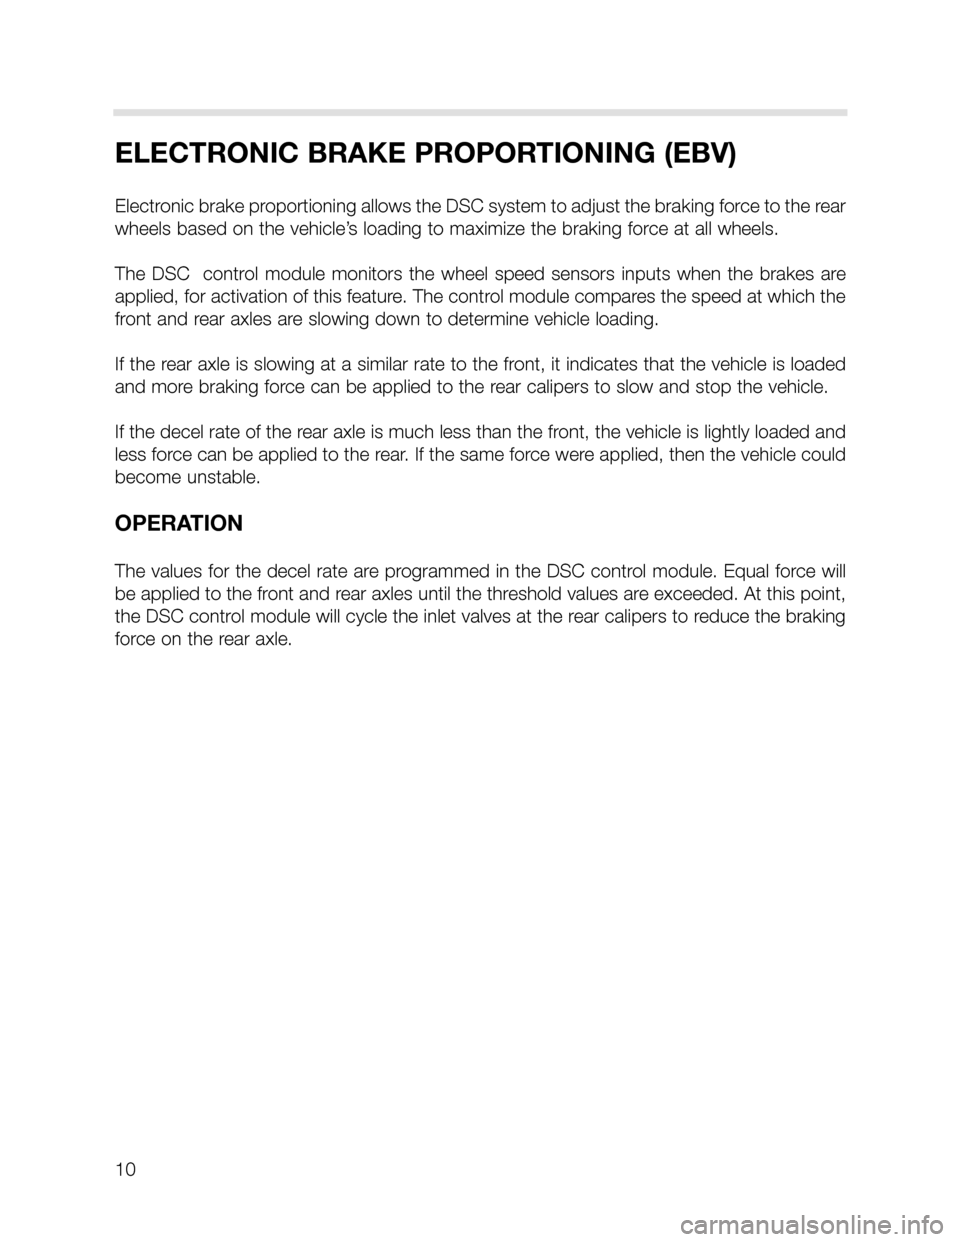 BMW X5 2003 E53 DSC System Workshop Manual 10
ELECTRONIC BRAKE PROPORTIONING (EBV)
Electronic brake proportioning allows the DSC system to adjust the braking force to the rear
wheels based on the vehicle’s loading to maximize the braking for